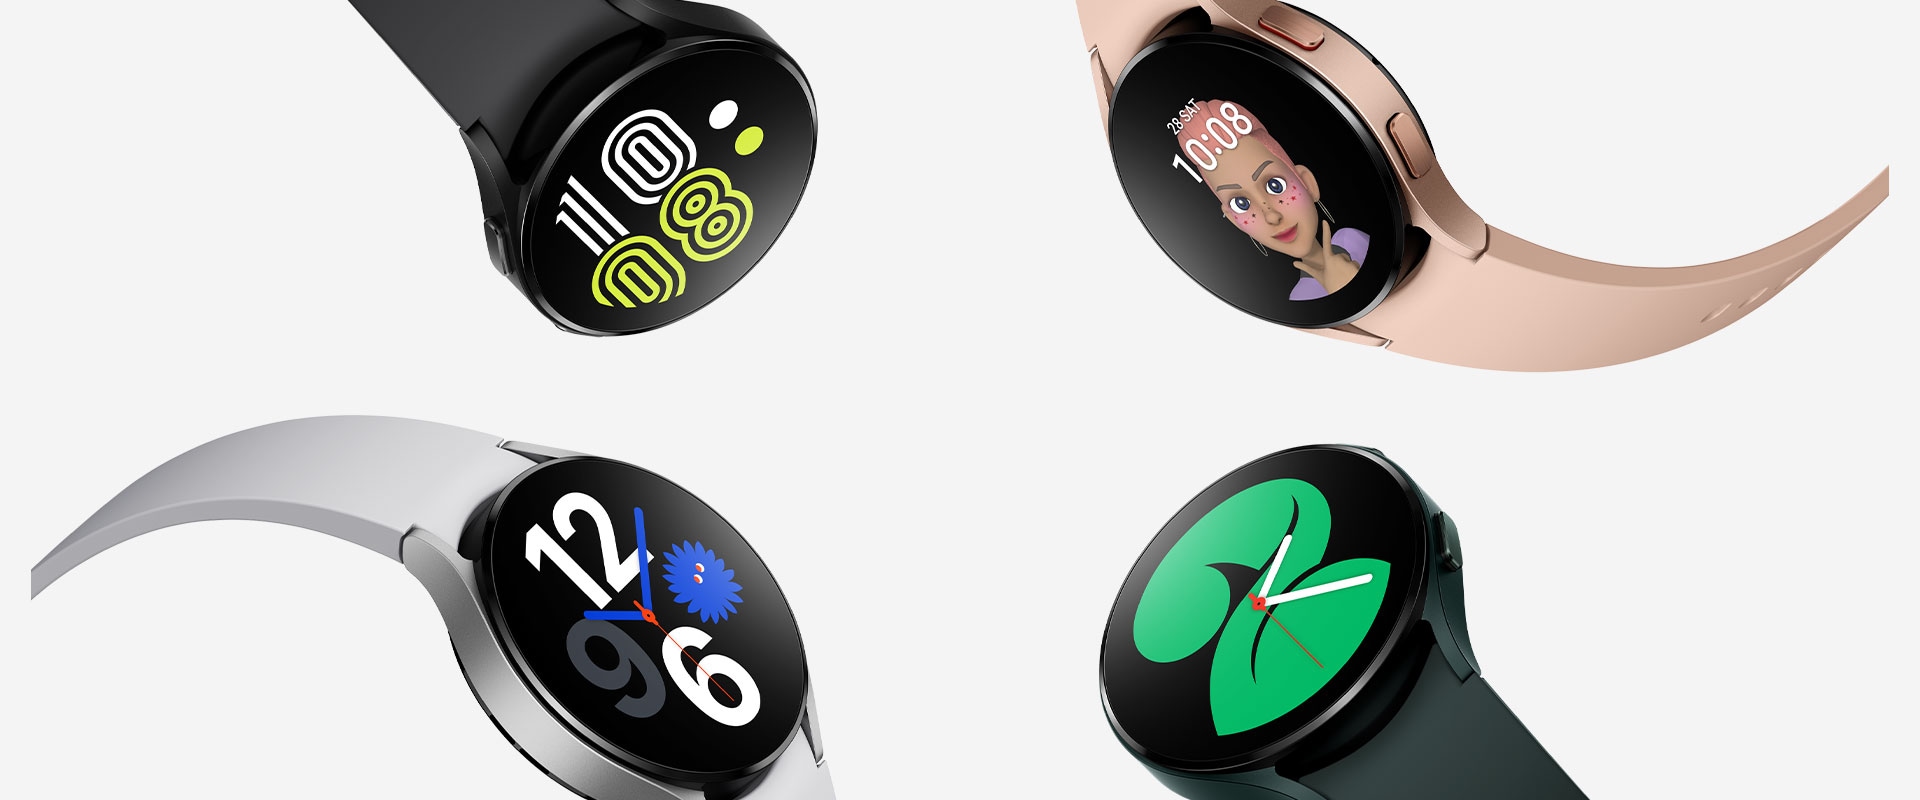 Four Galaxy Watch4 devices are grouped together, with each watch prominently showing different watch face styles to tell the time. Each watch is in a different color, from black, pink gold, green, to silver.